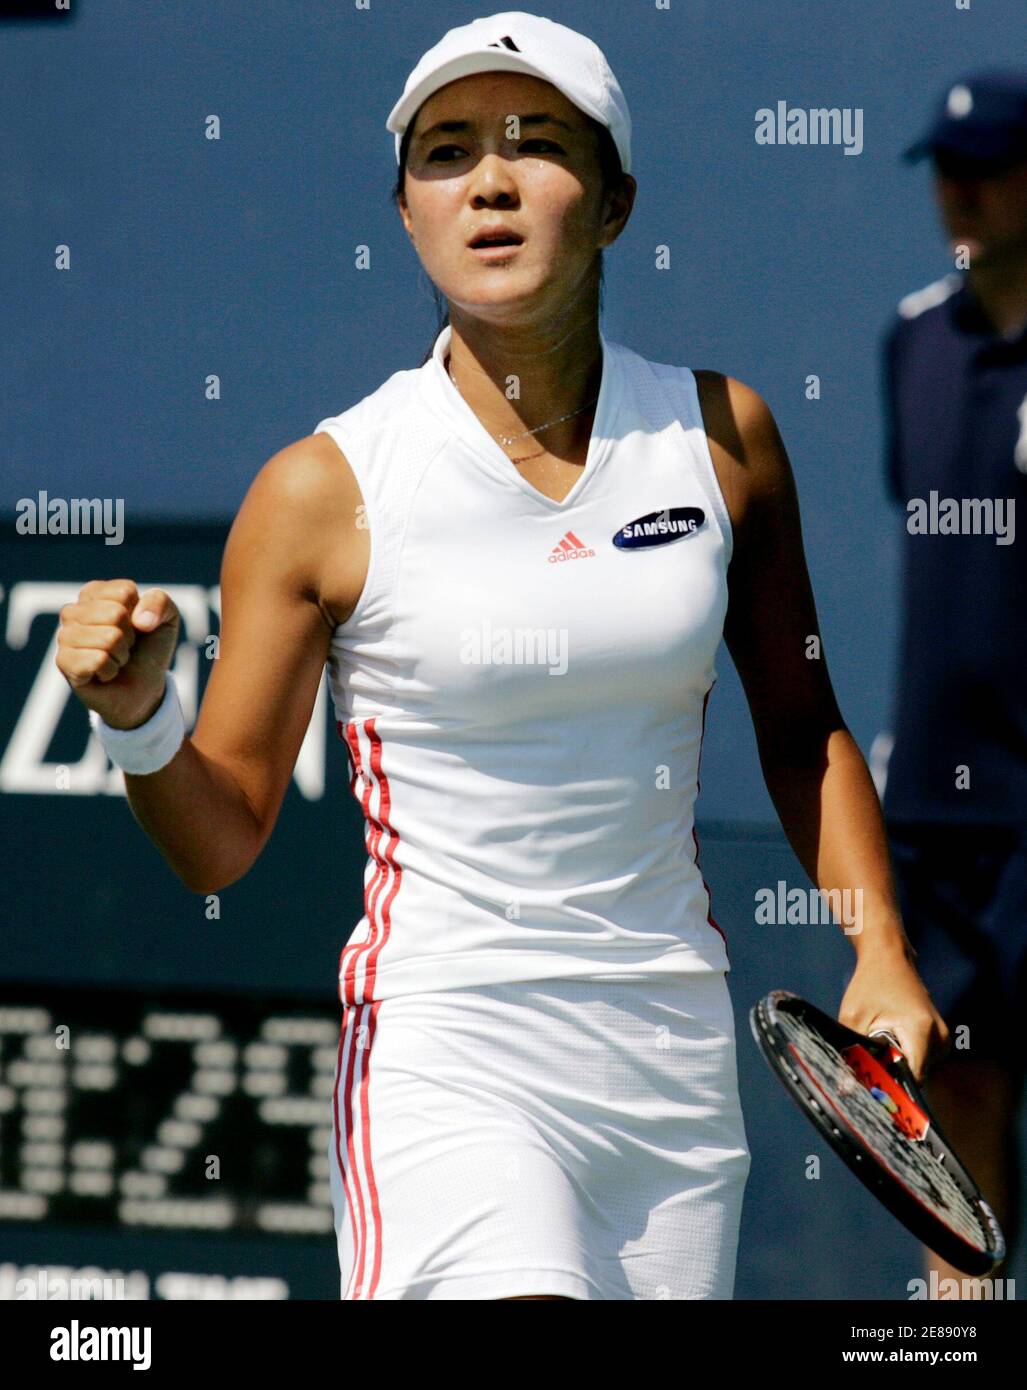 Cho Yoon Jeong of South Korea celebrates a point against Gisela Dulko of  Argentina during their second round match at the U.S. Open tennis  tournament in Flushing Meadows, New York, September 1,